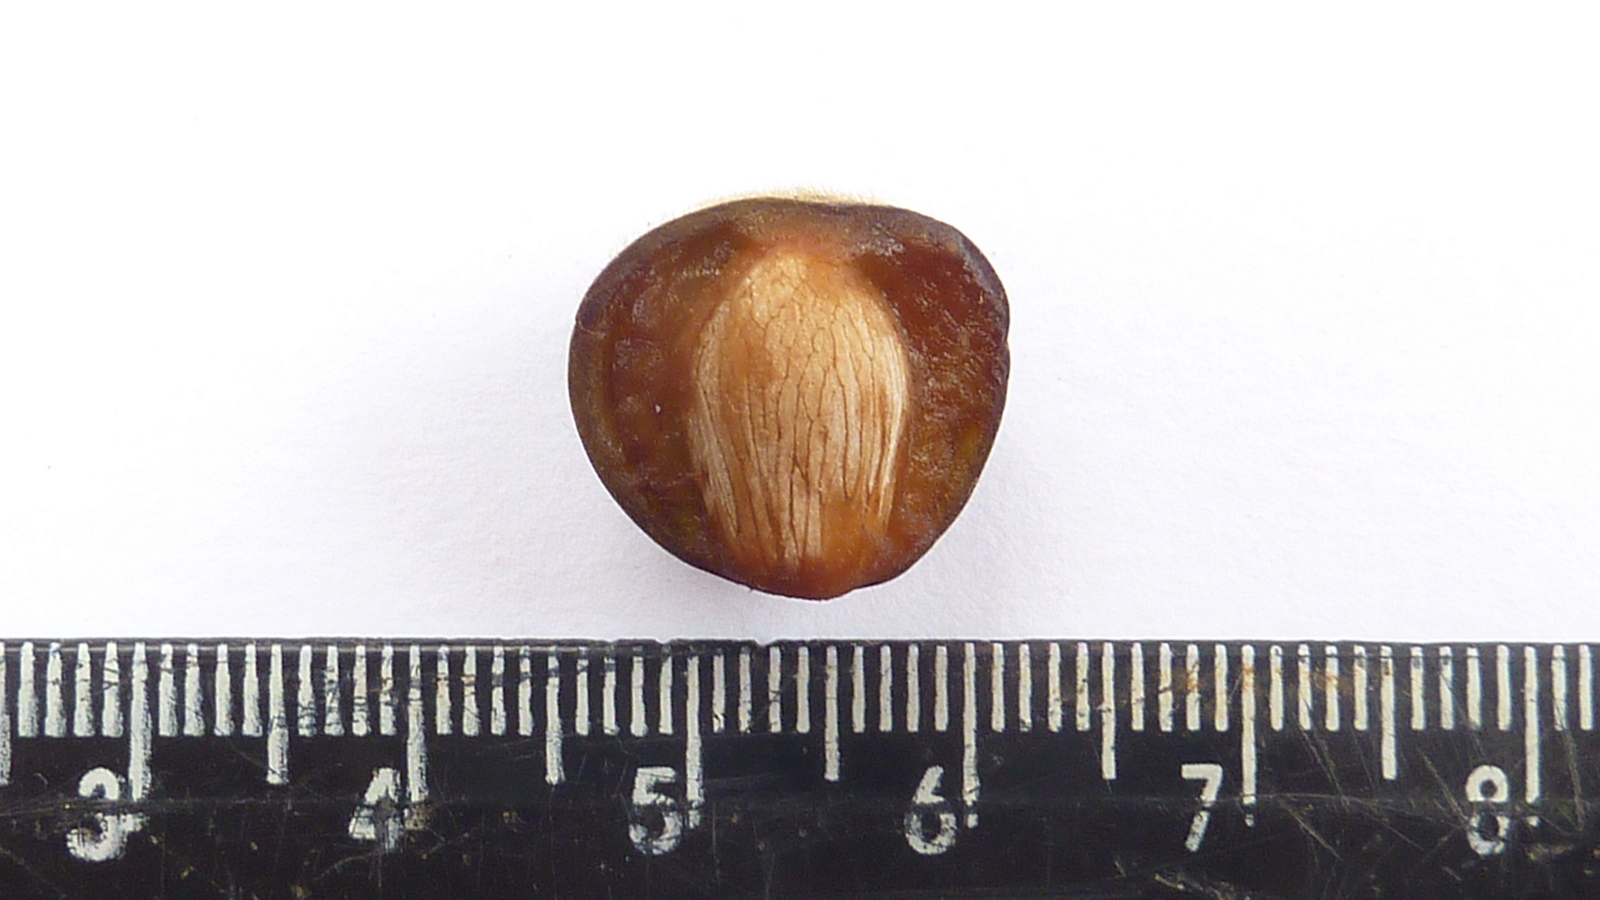 a nut next to a ruler showing the size